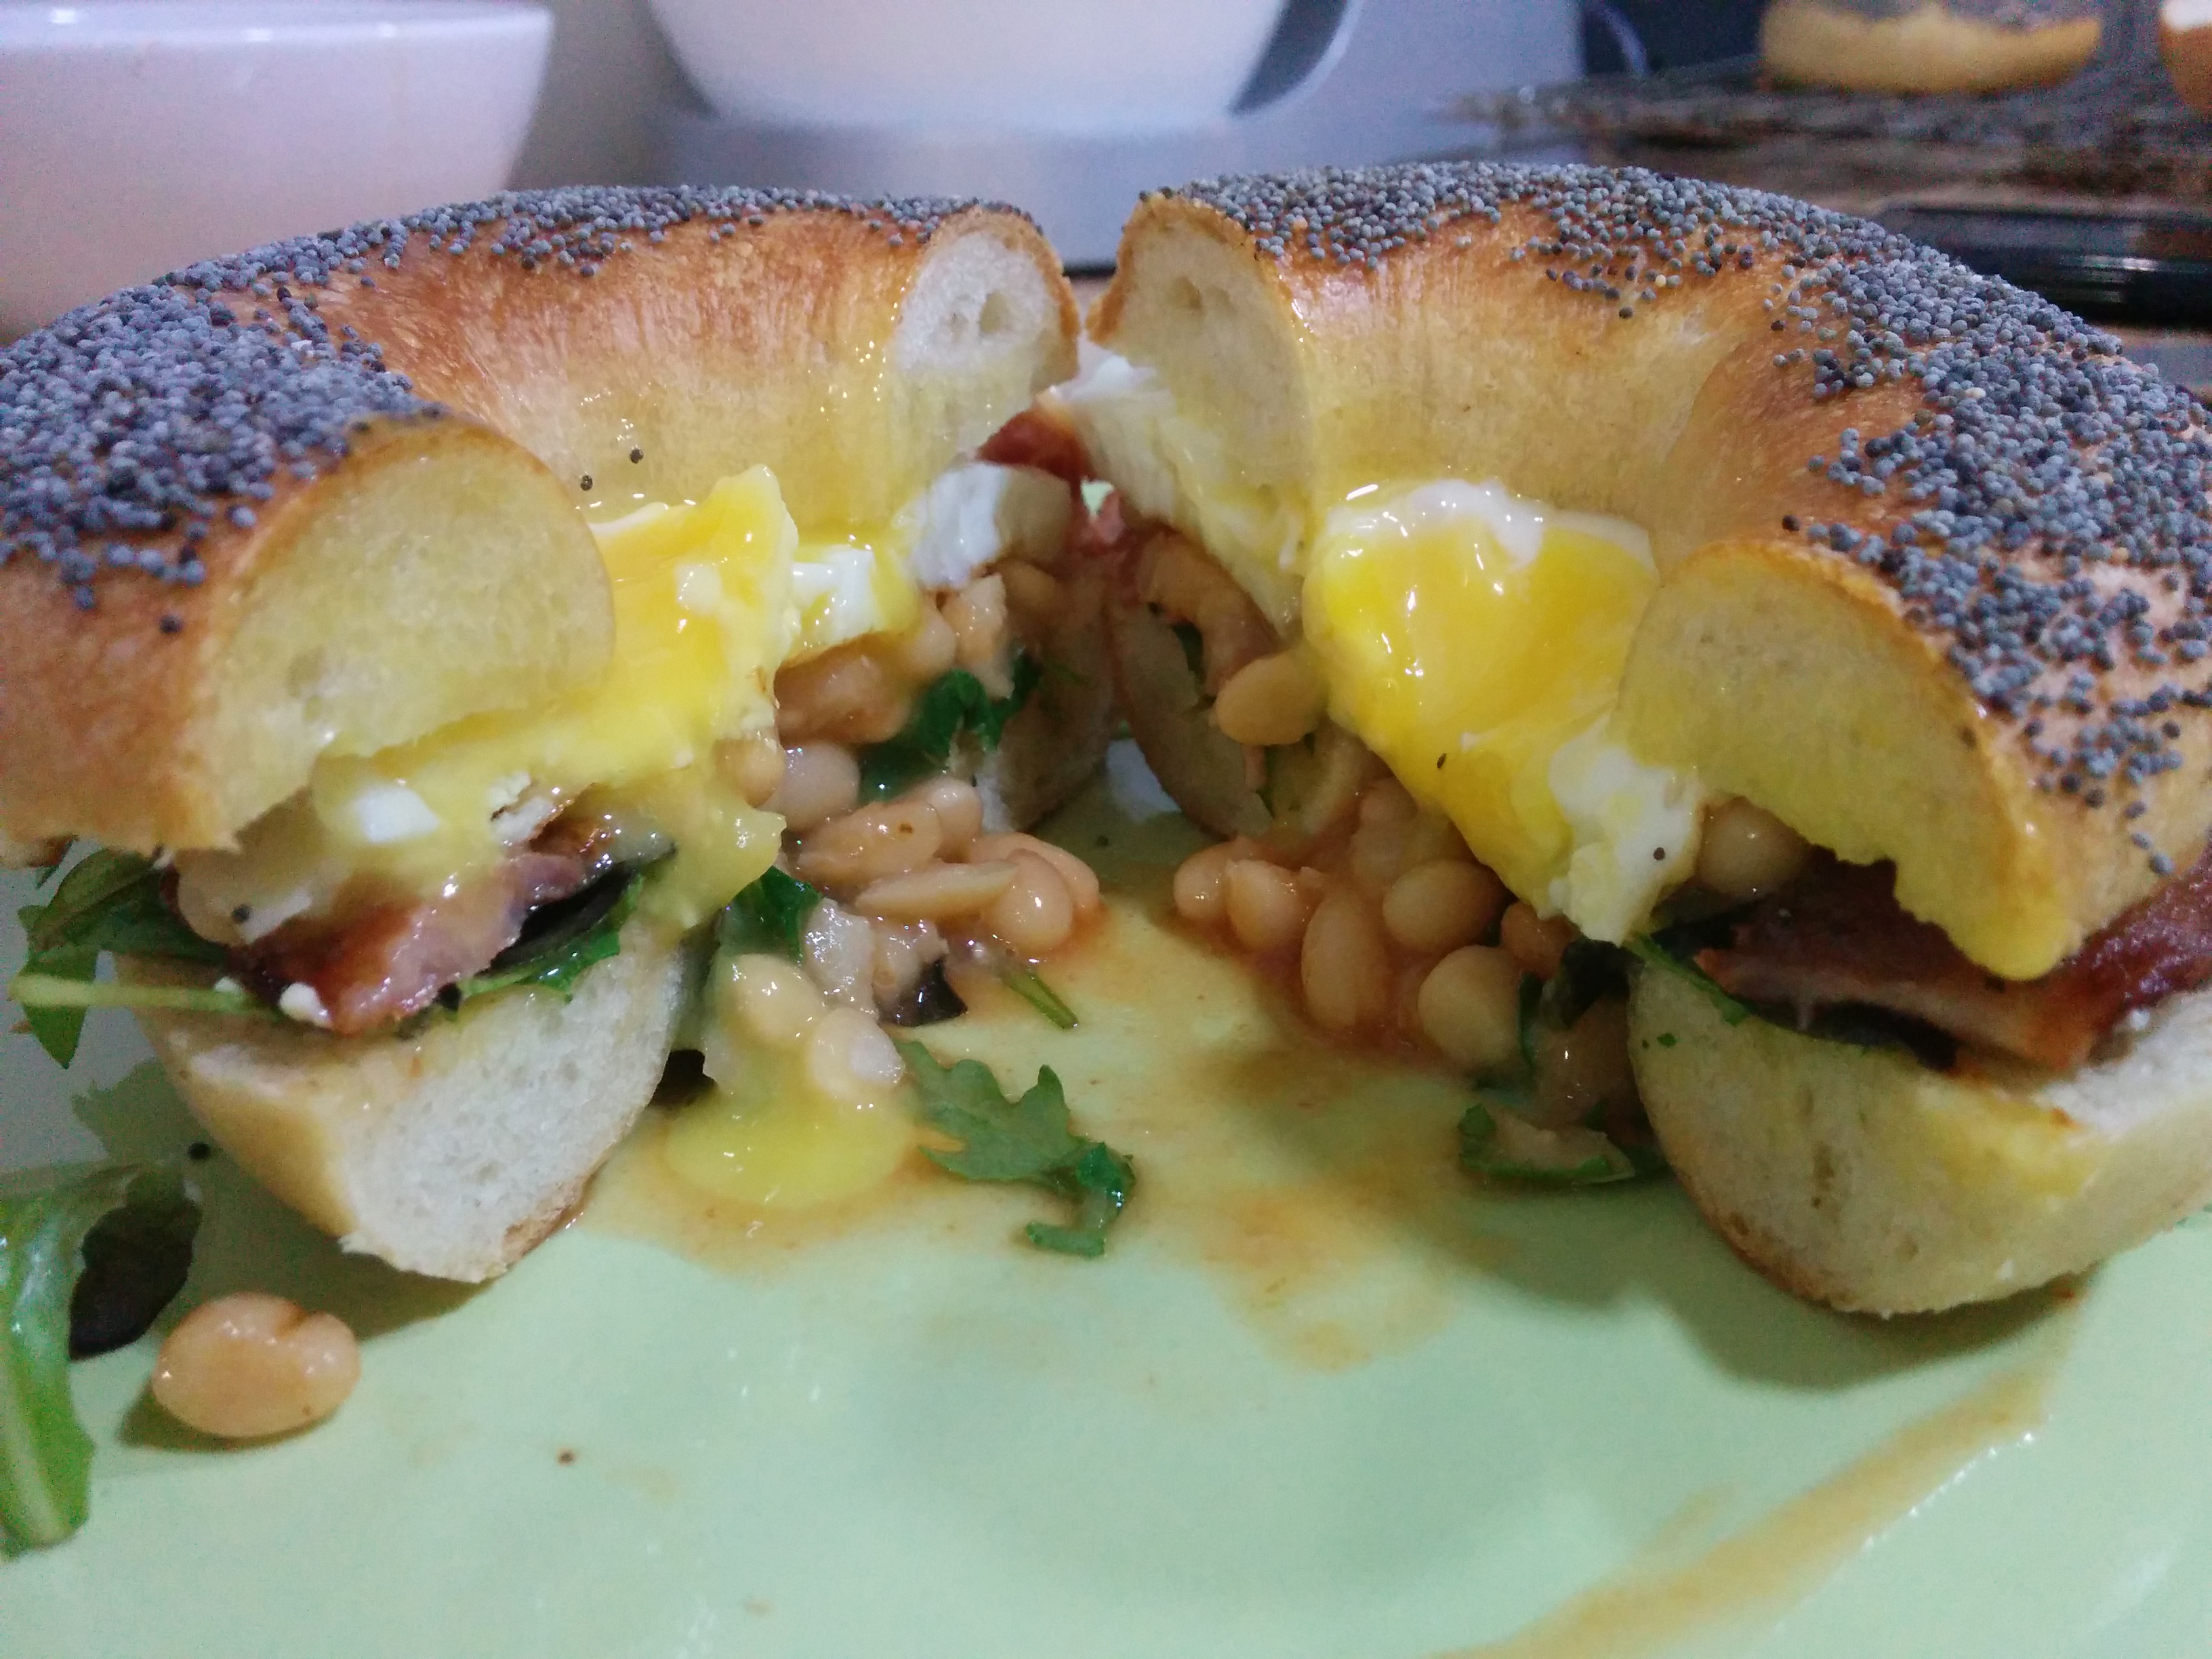 A bagel with rocket, fried backon, beans in tomato sauce and a fried egg